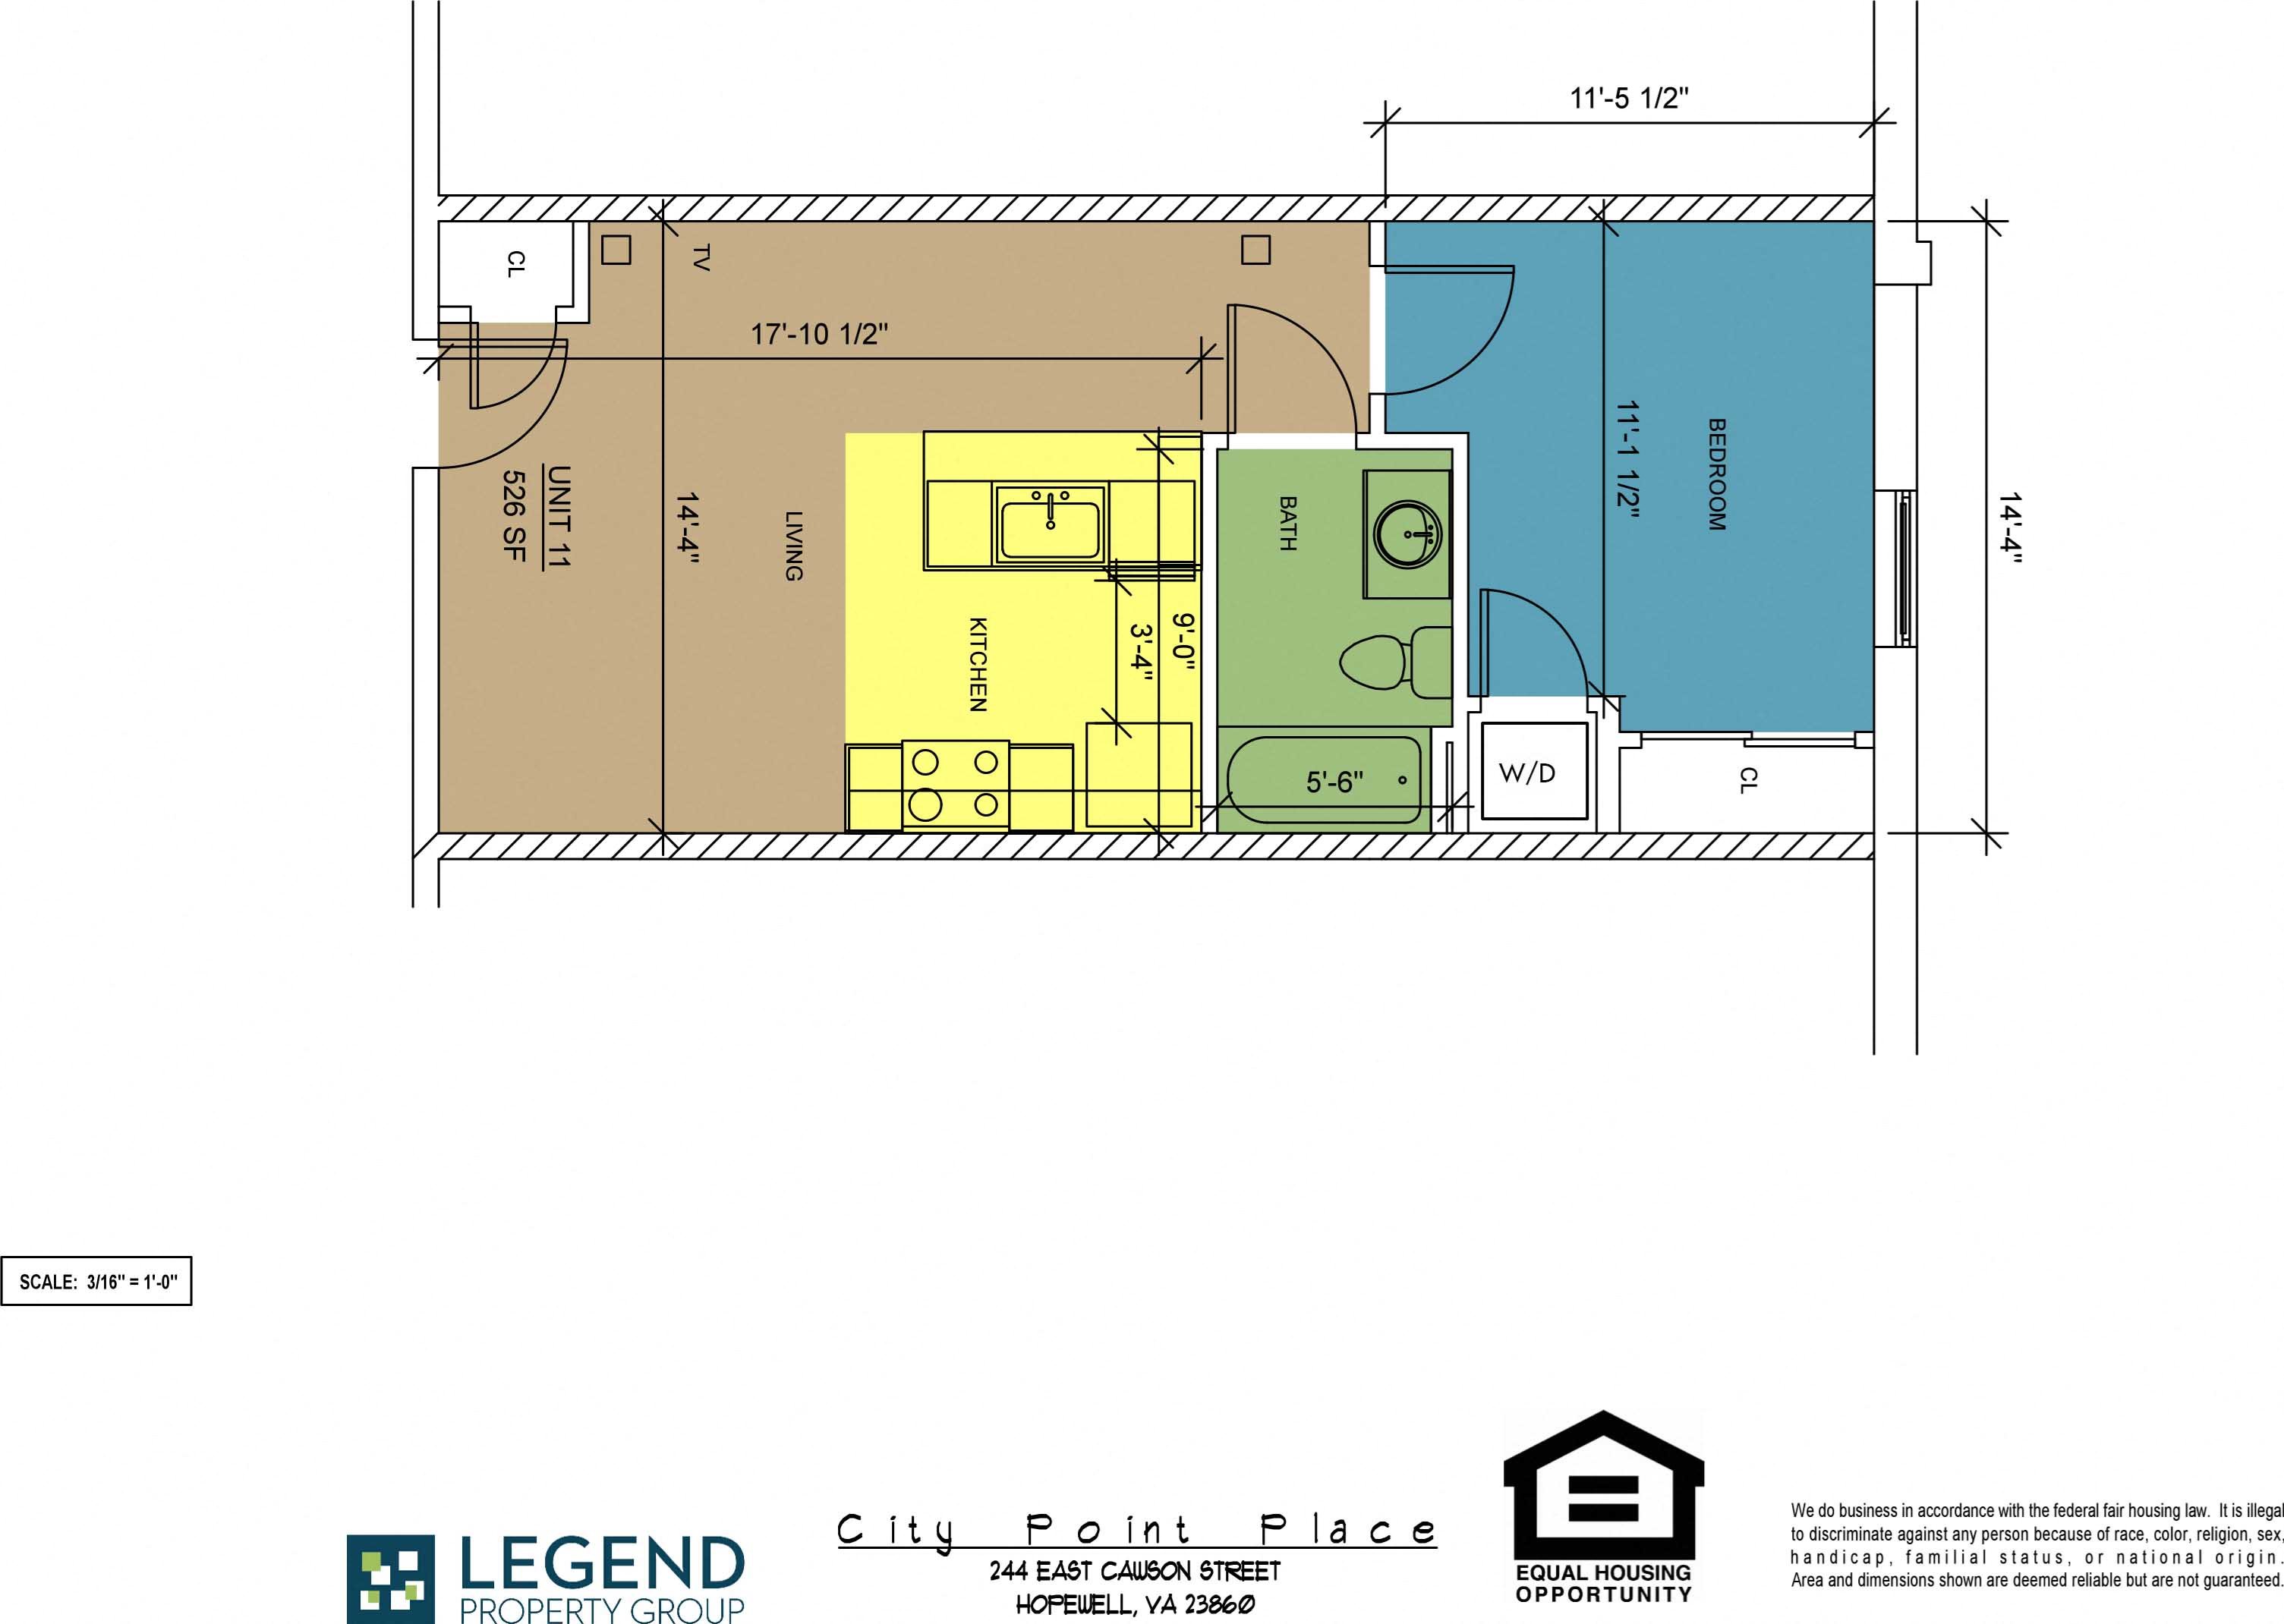 Floor Plans of City Point Place in Hopewell, VA